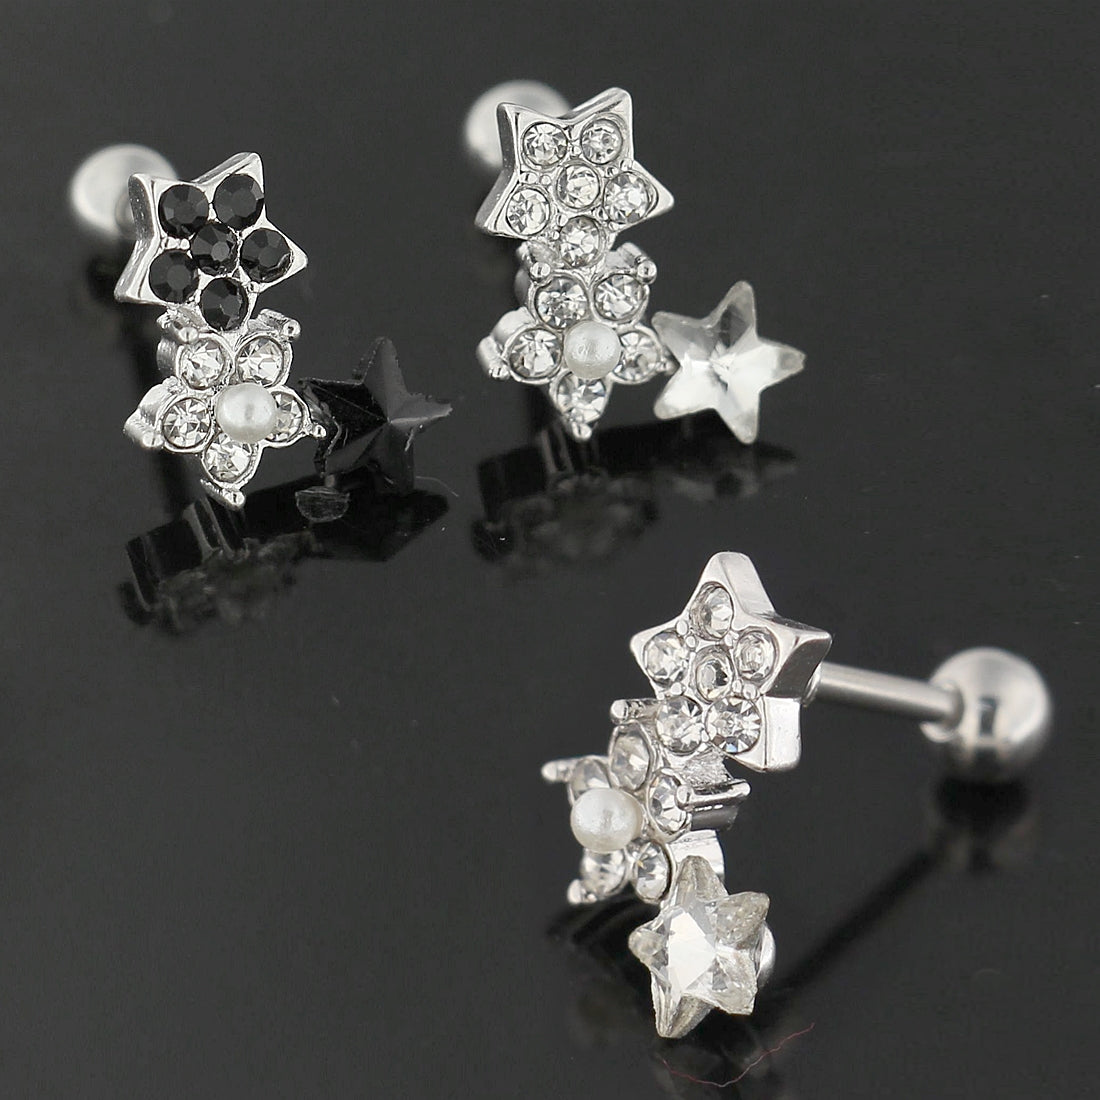 Cartilage Tragus Piercing Jeweled Flower with Star Ear Stud